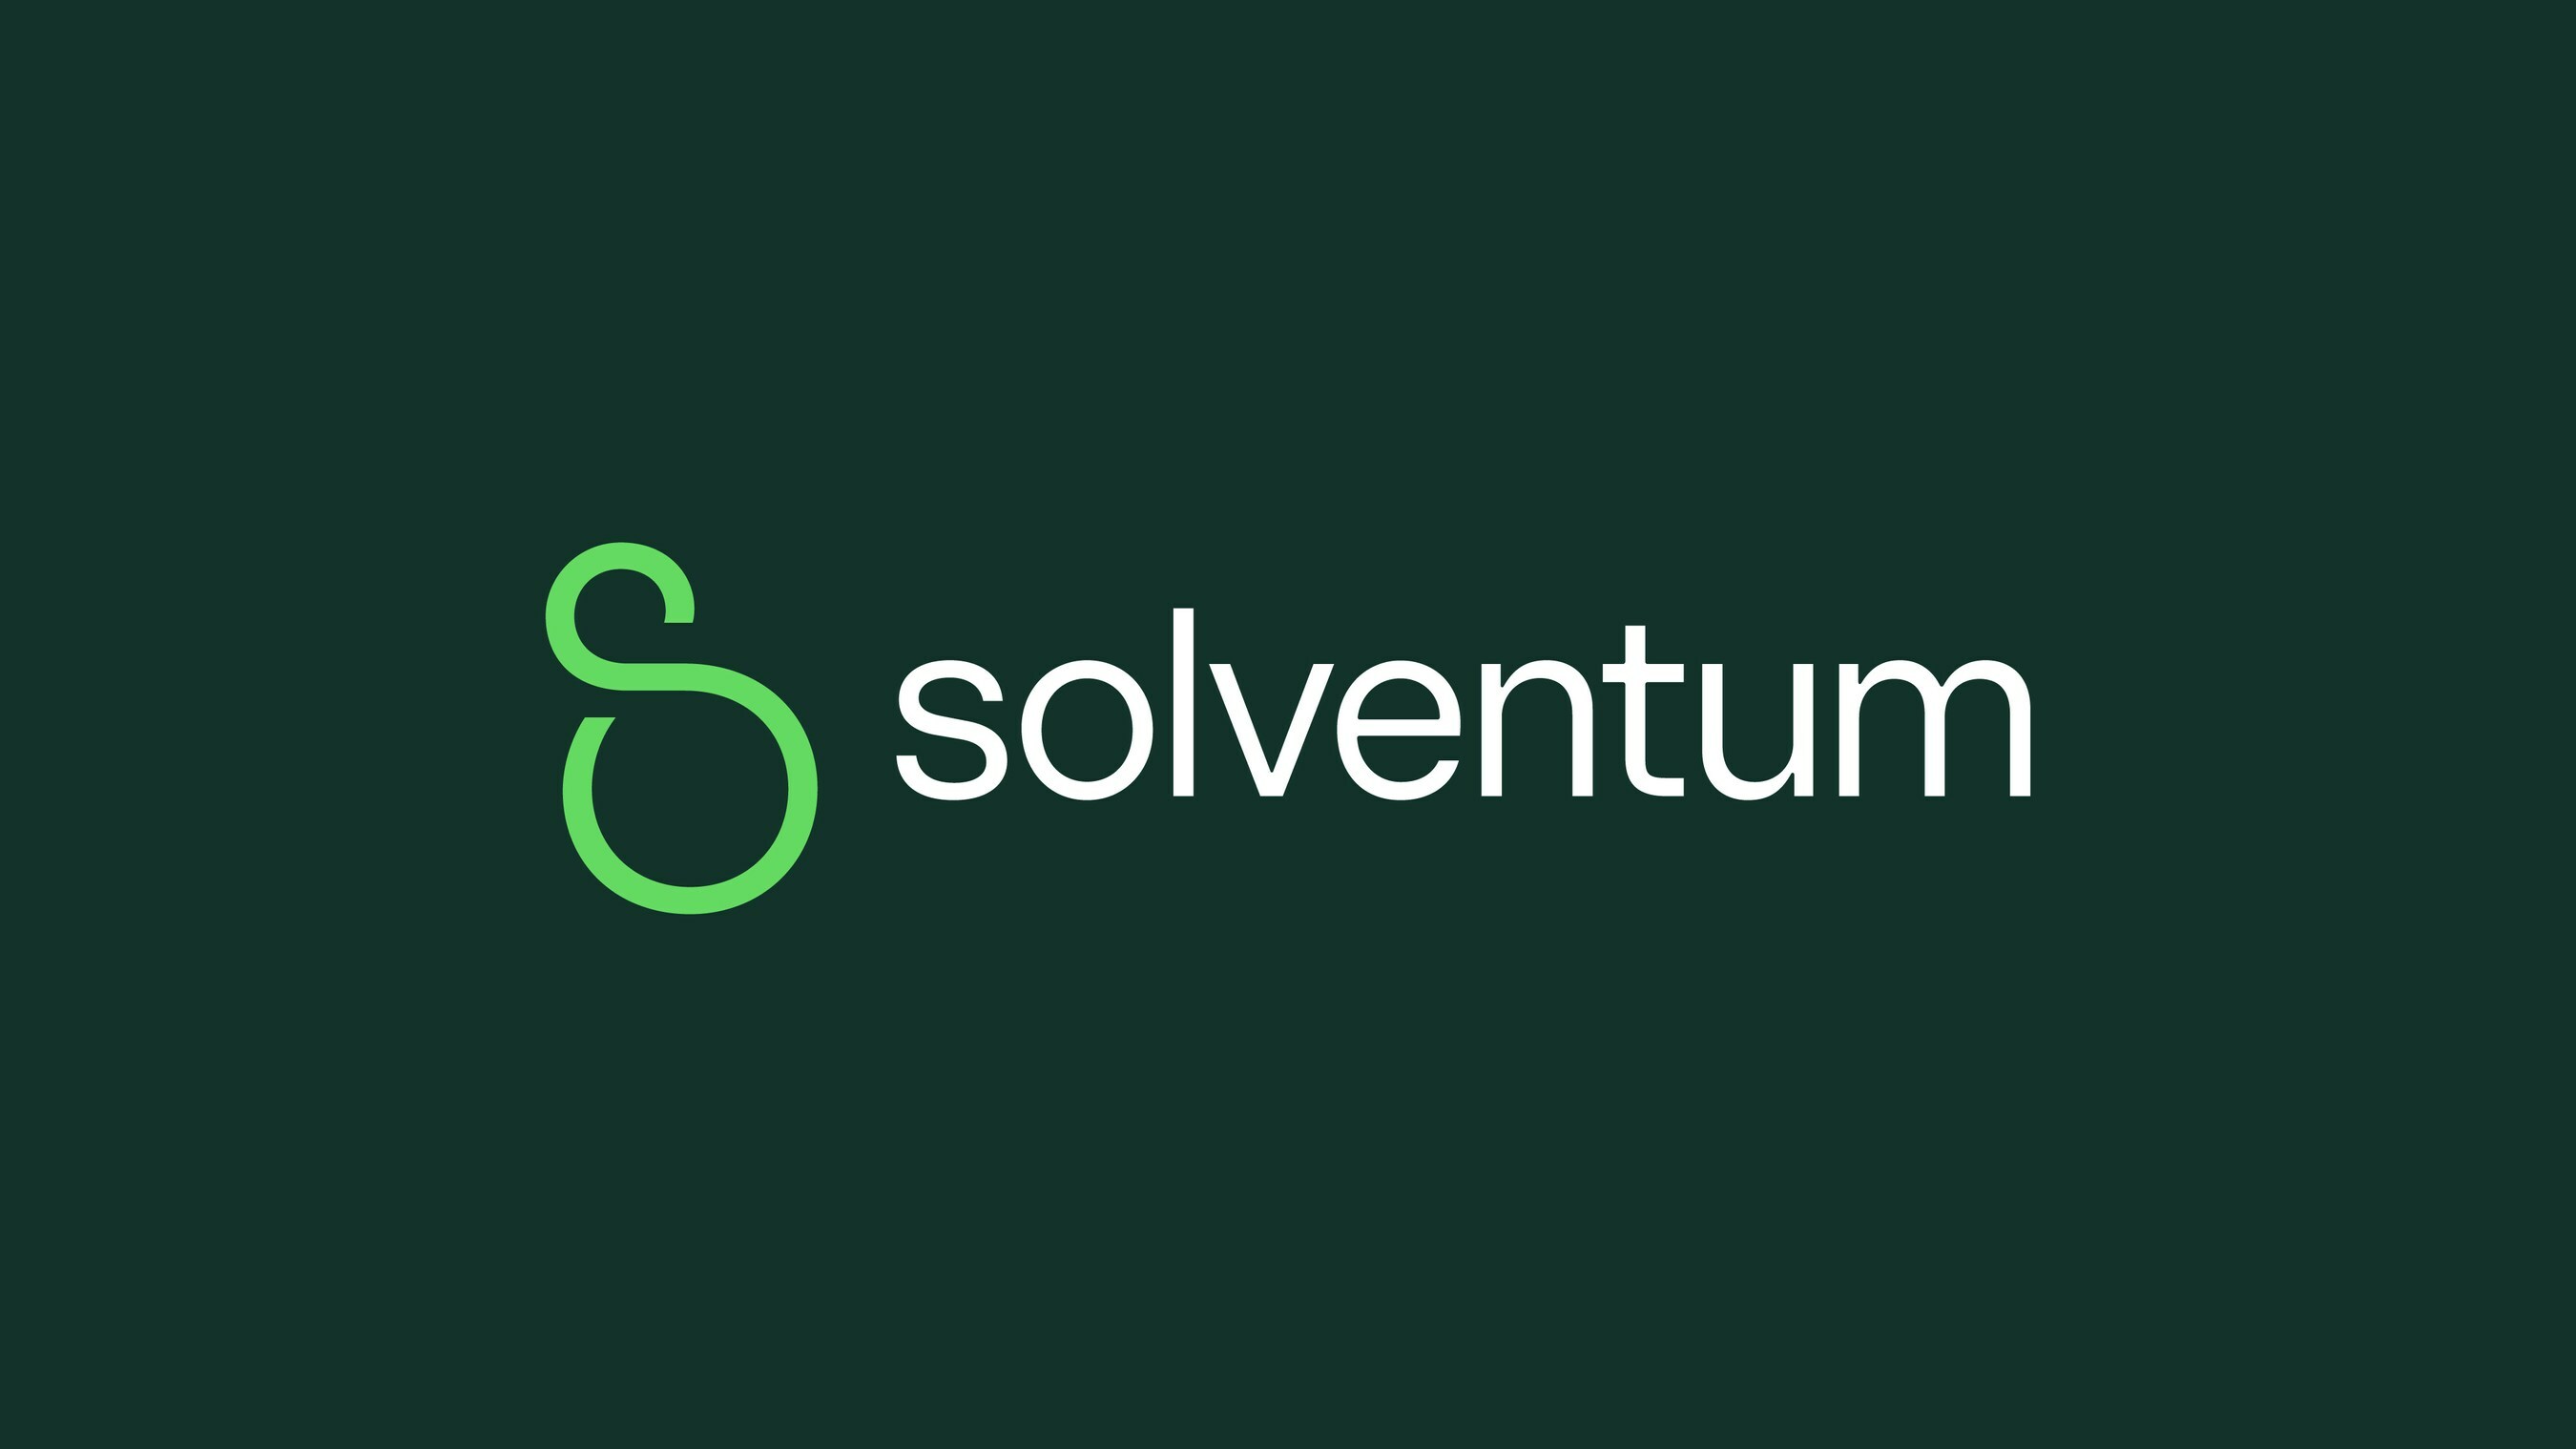 Solventum's corporate logo. It consists of a lime green, stylized letter S that looks a little like a bowling pin tilted by negative 10 degrees, and the corporation's name in a white sans-serif type face against a forest green background.